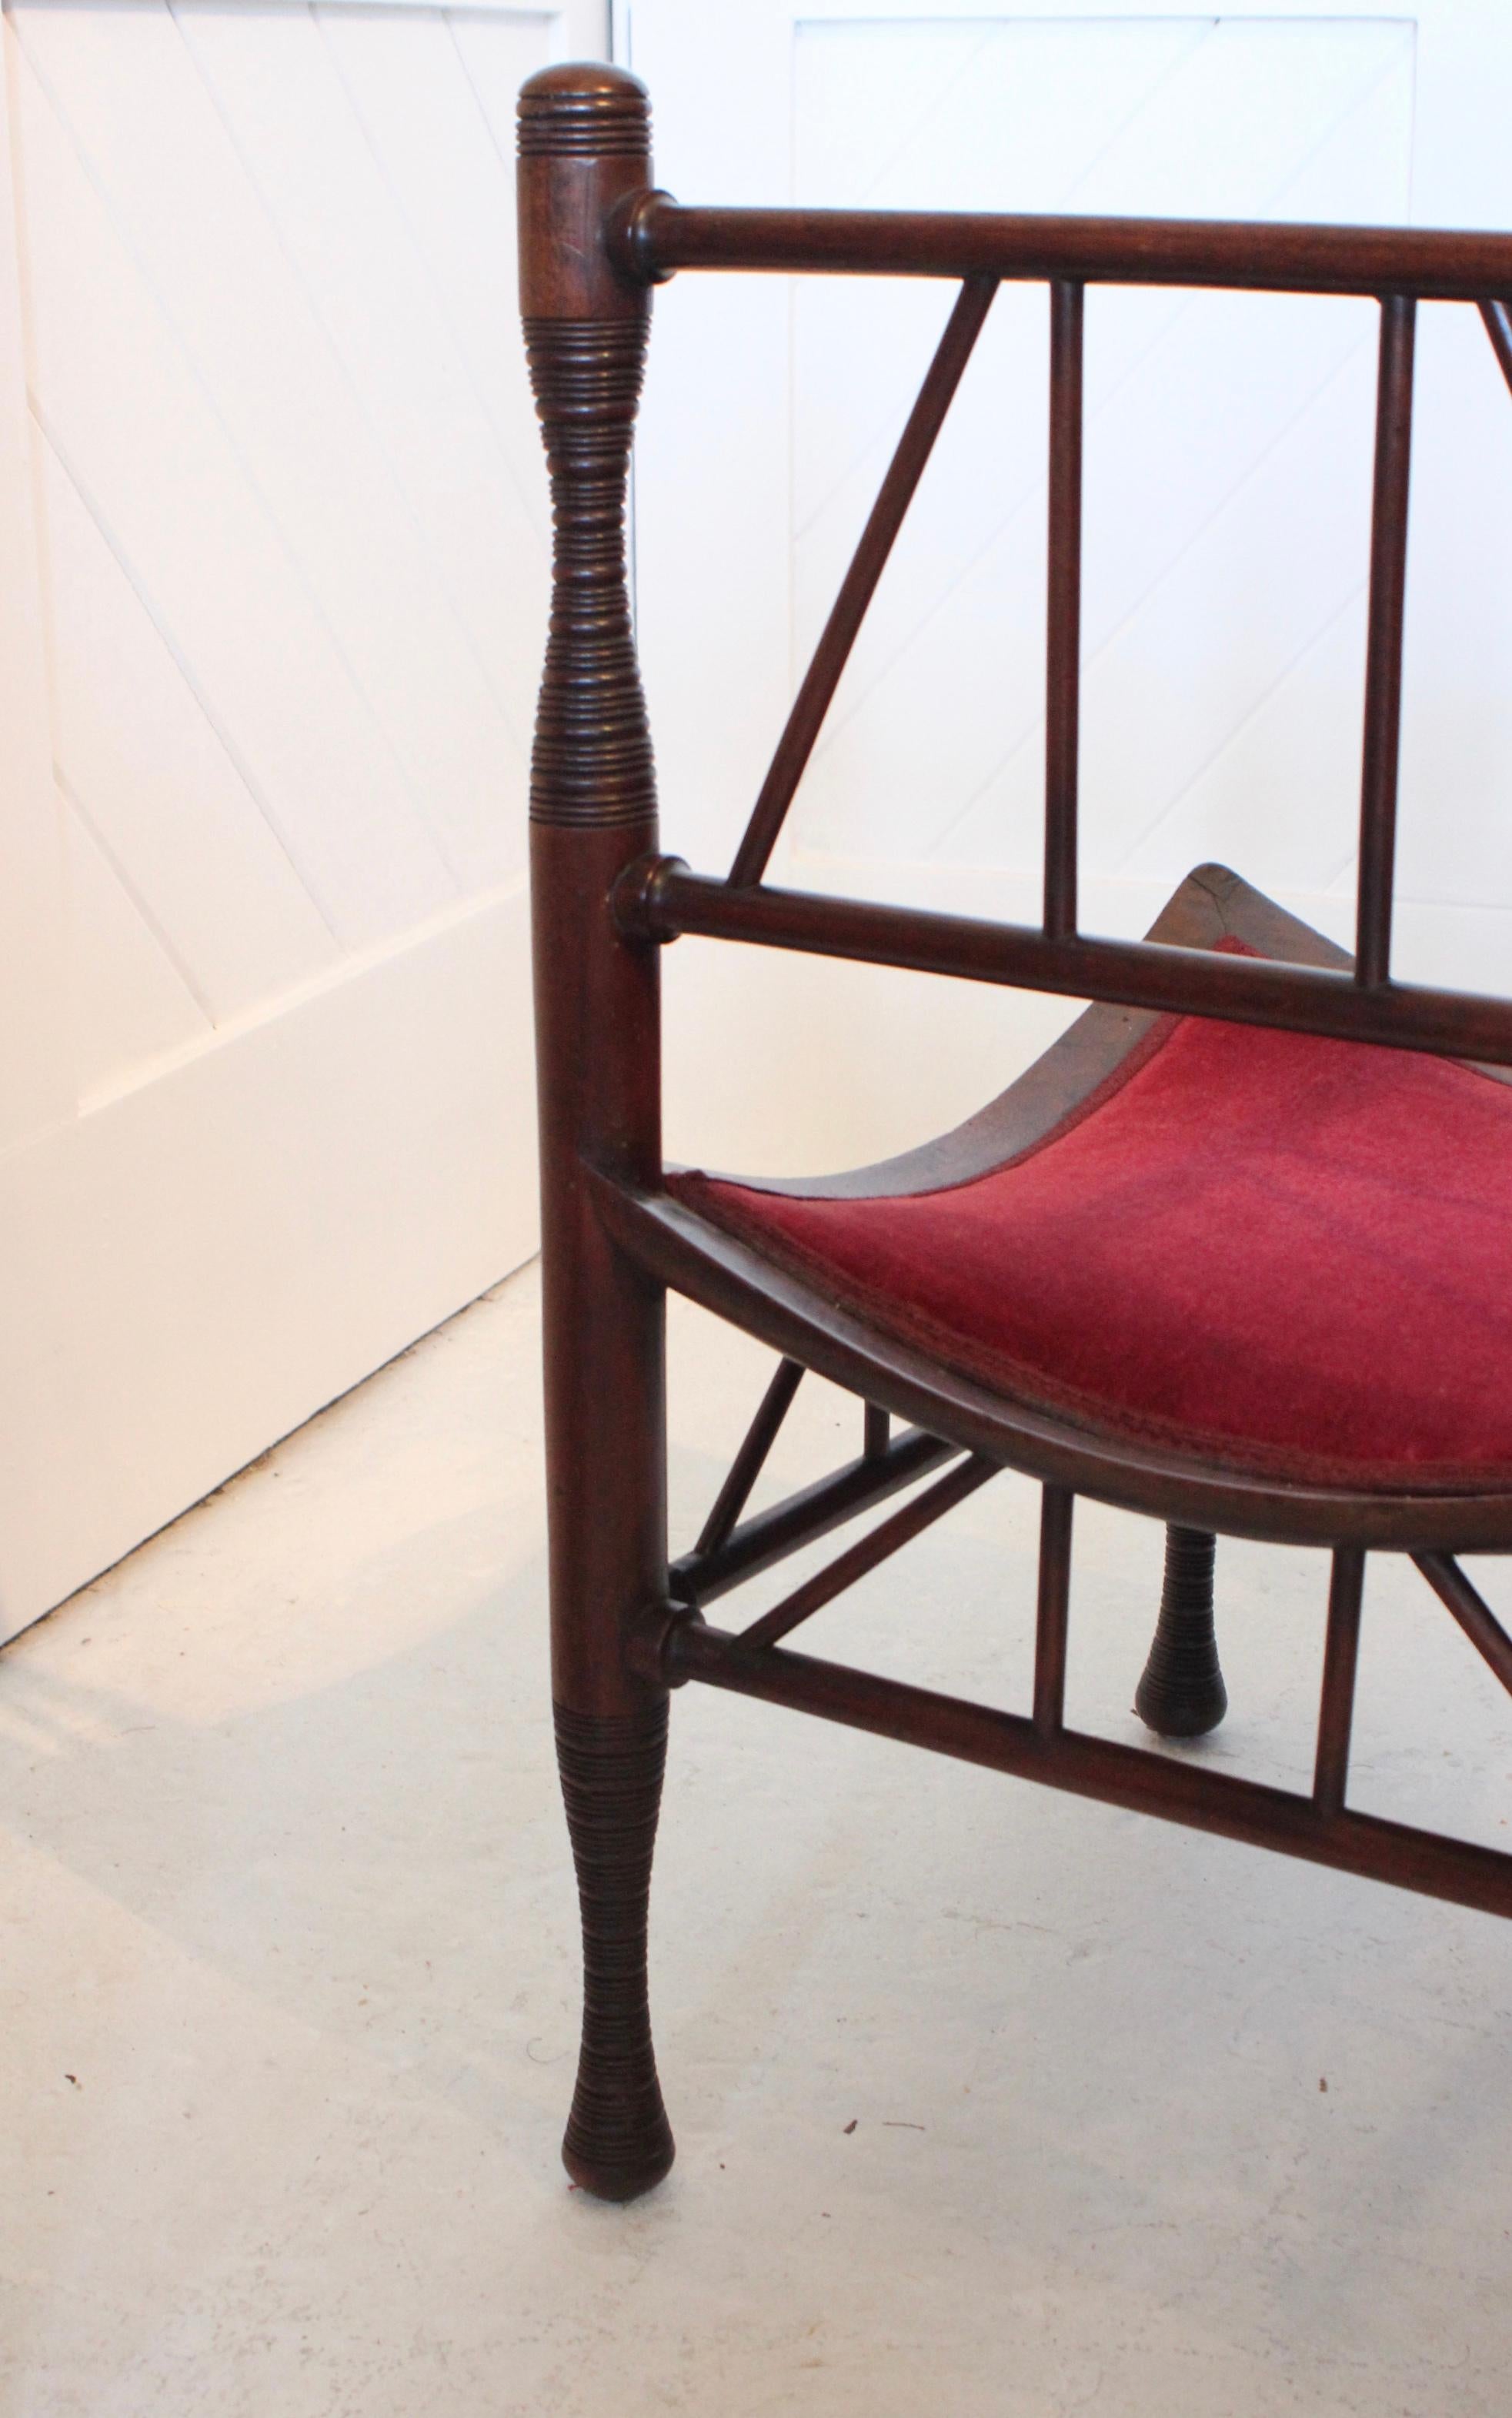 Aesthetic Movement rare ‘Thebes’ walnut corner chair
Red velvet seat
By Liberty & Co
Circa 1885
 